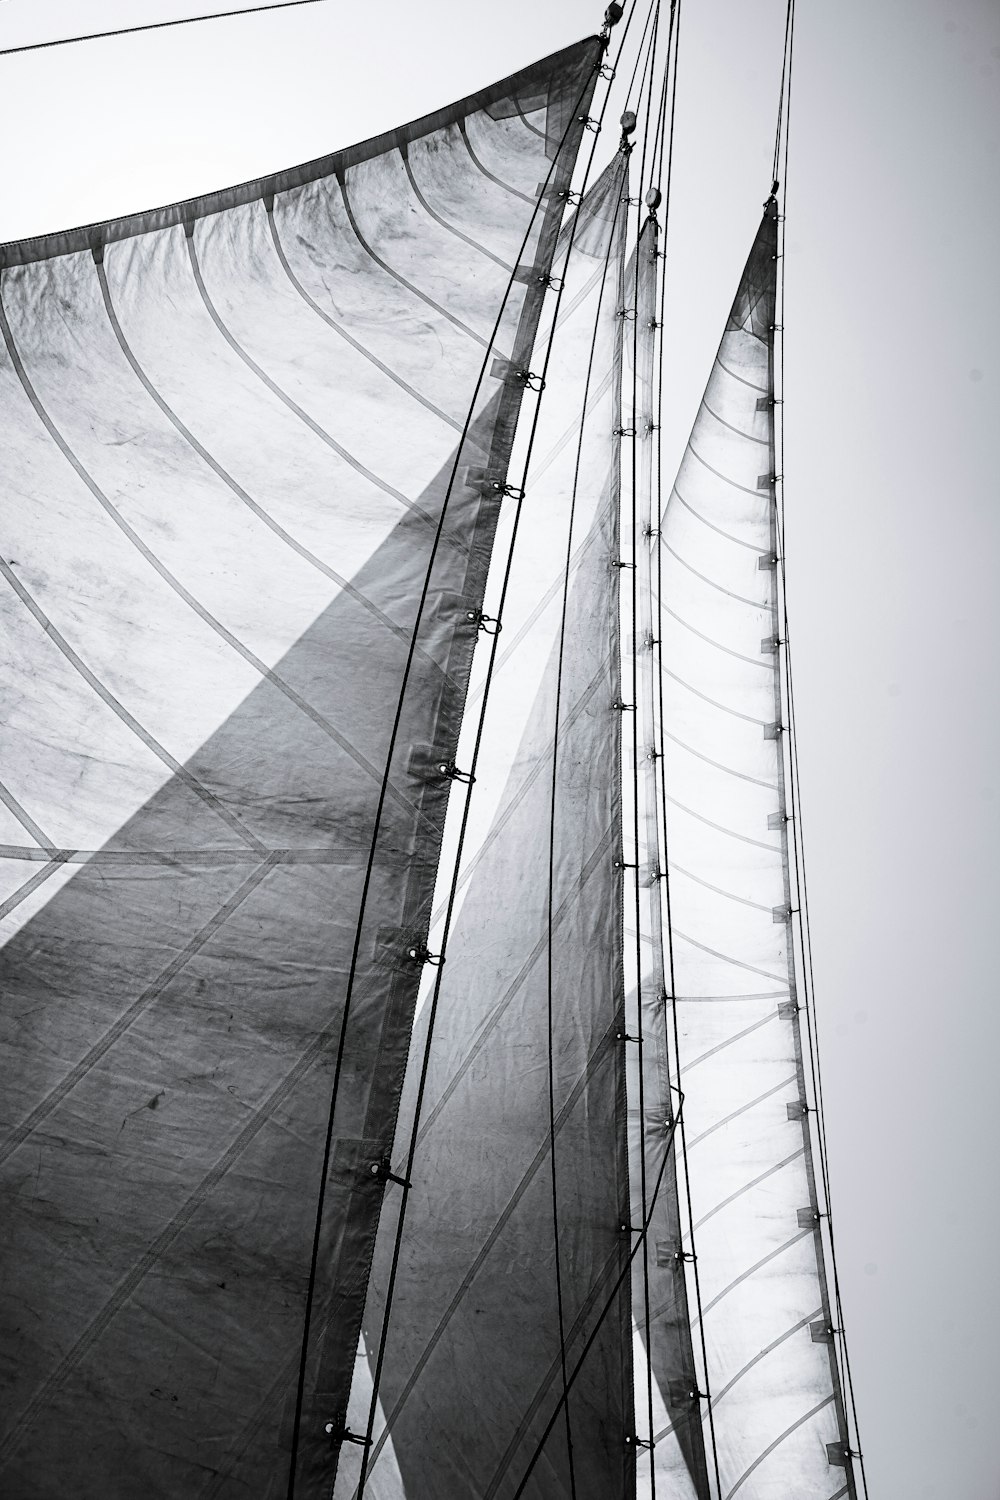 a black and white photo of the sails of a sailboat